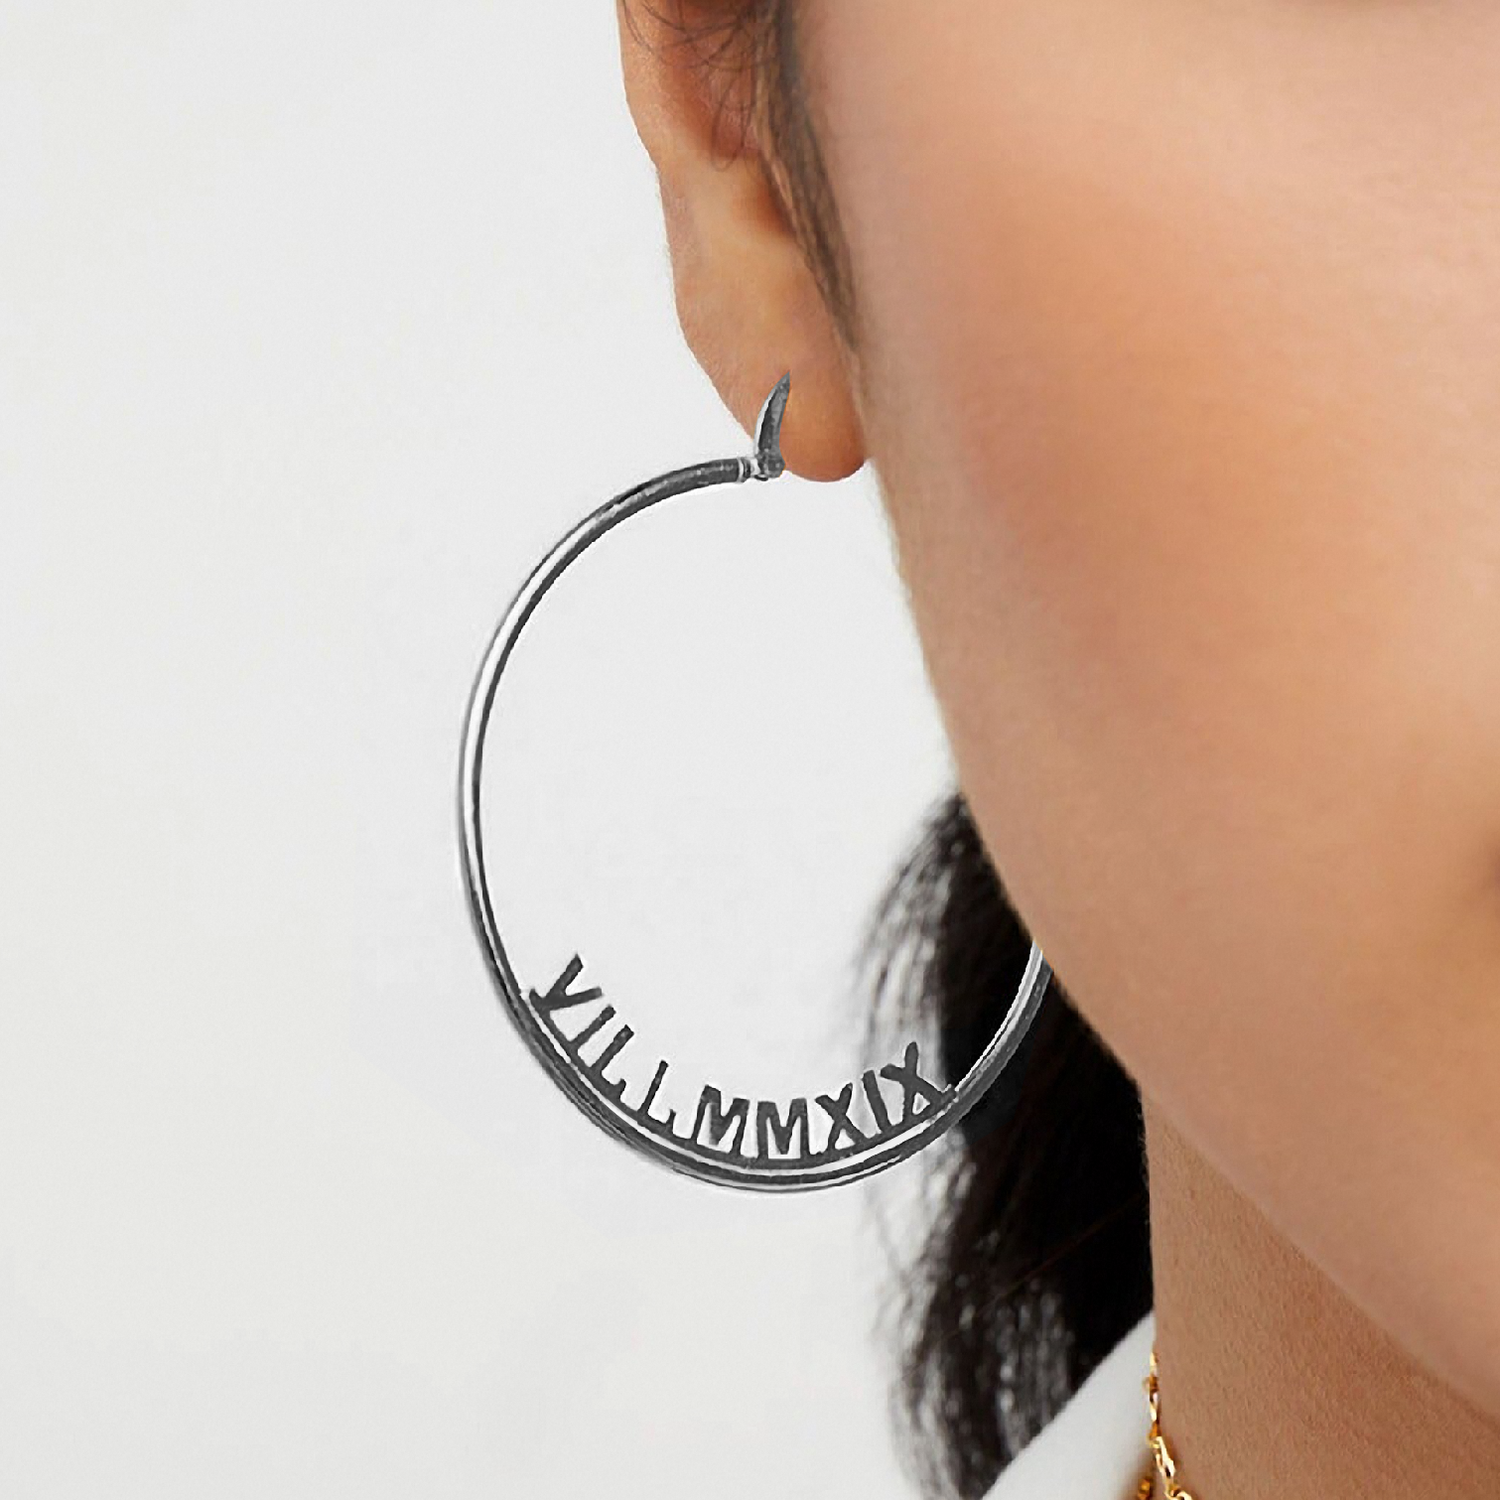 Hollow Name Personalized Earrings